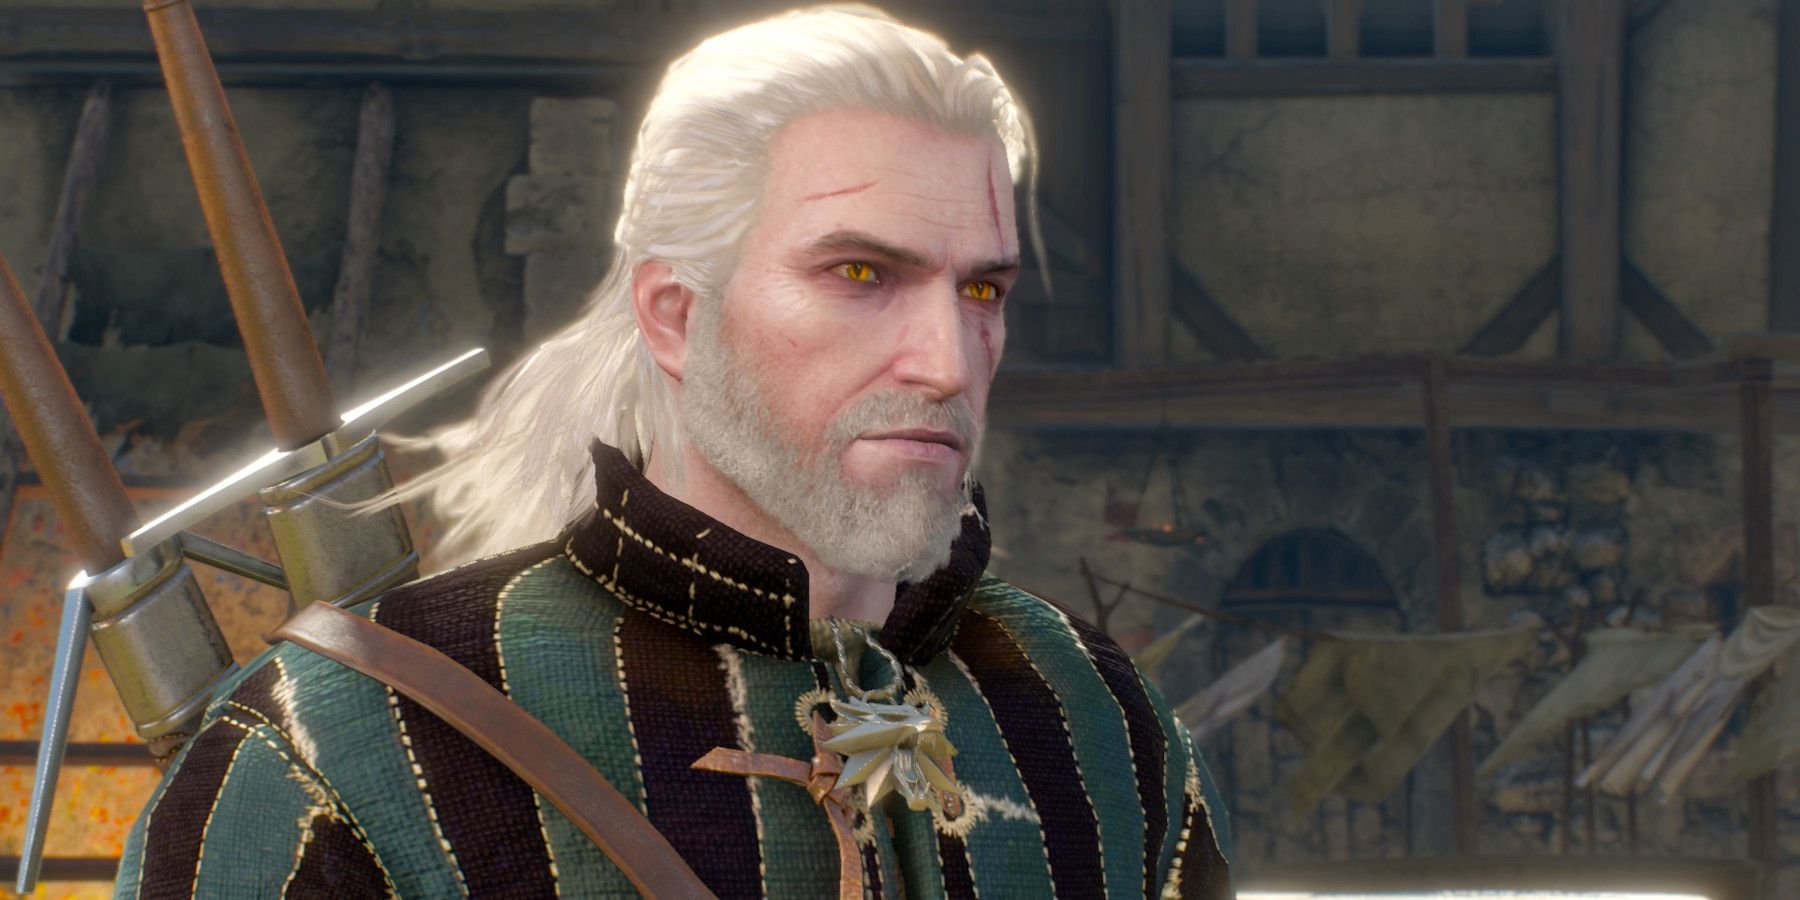 A close up of Geralt from the game The Witcher 3: Wild Hunt